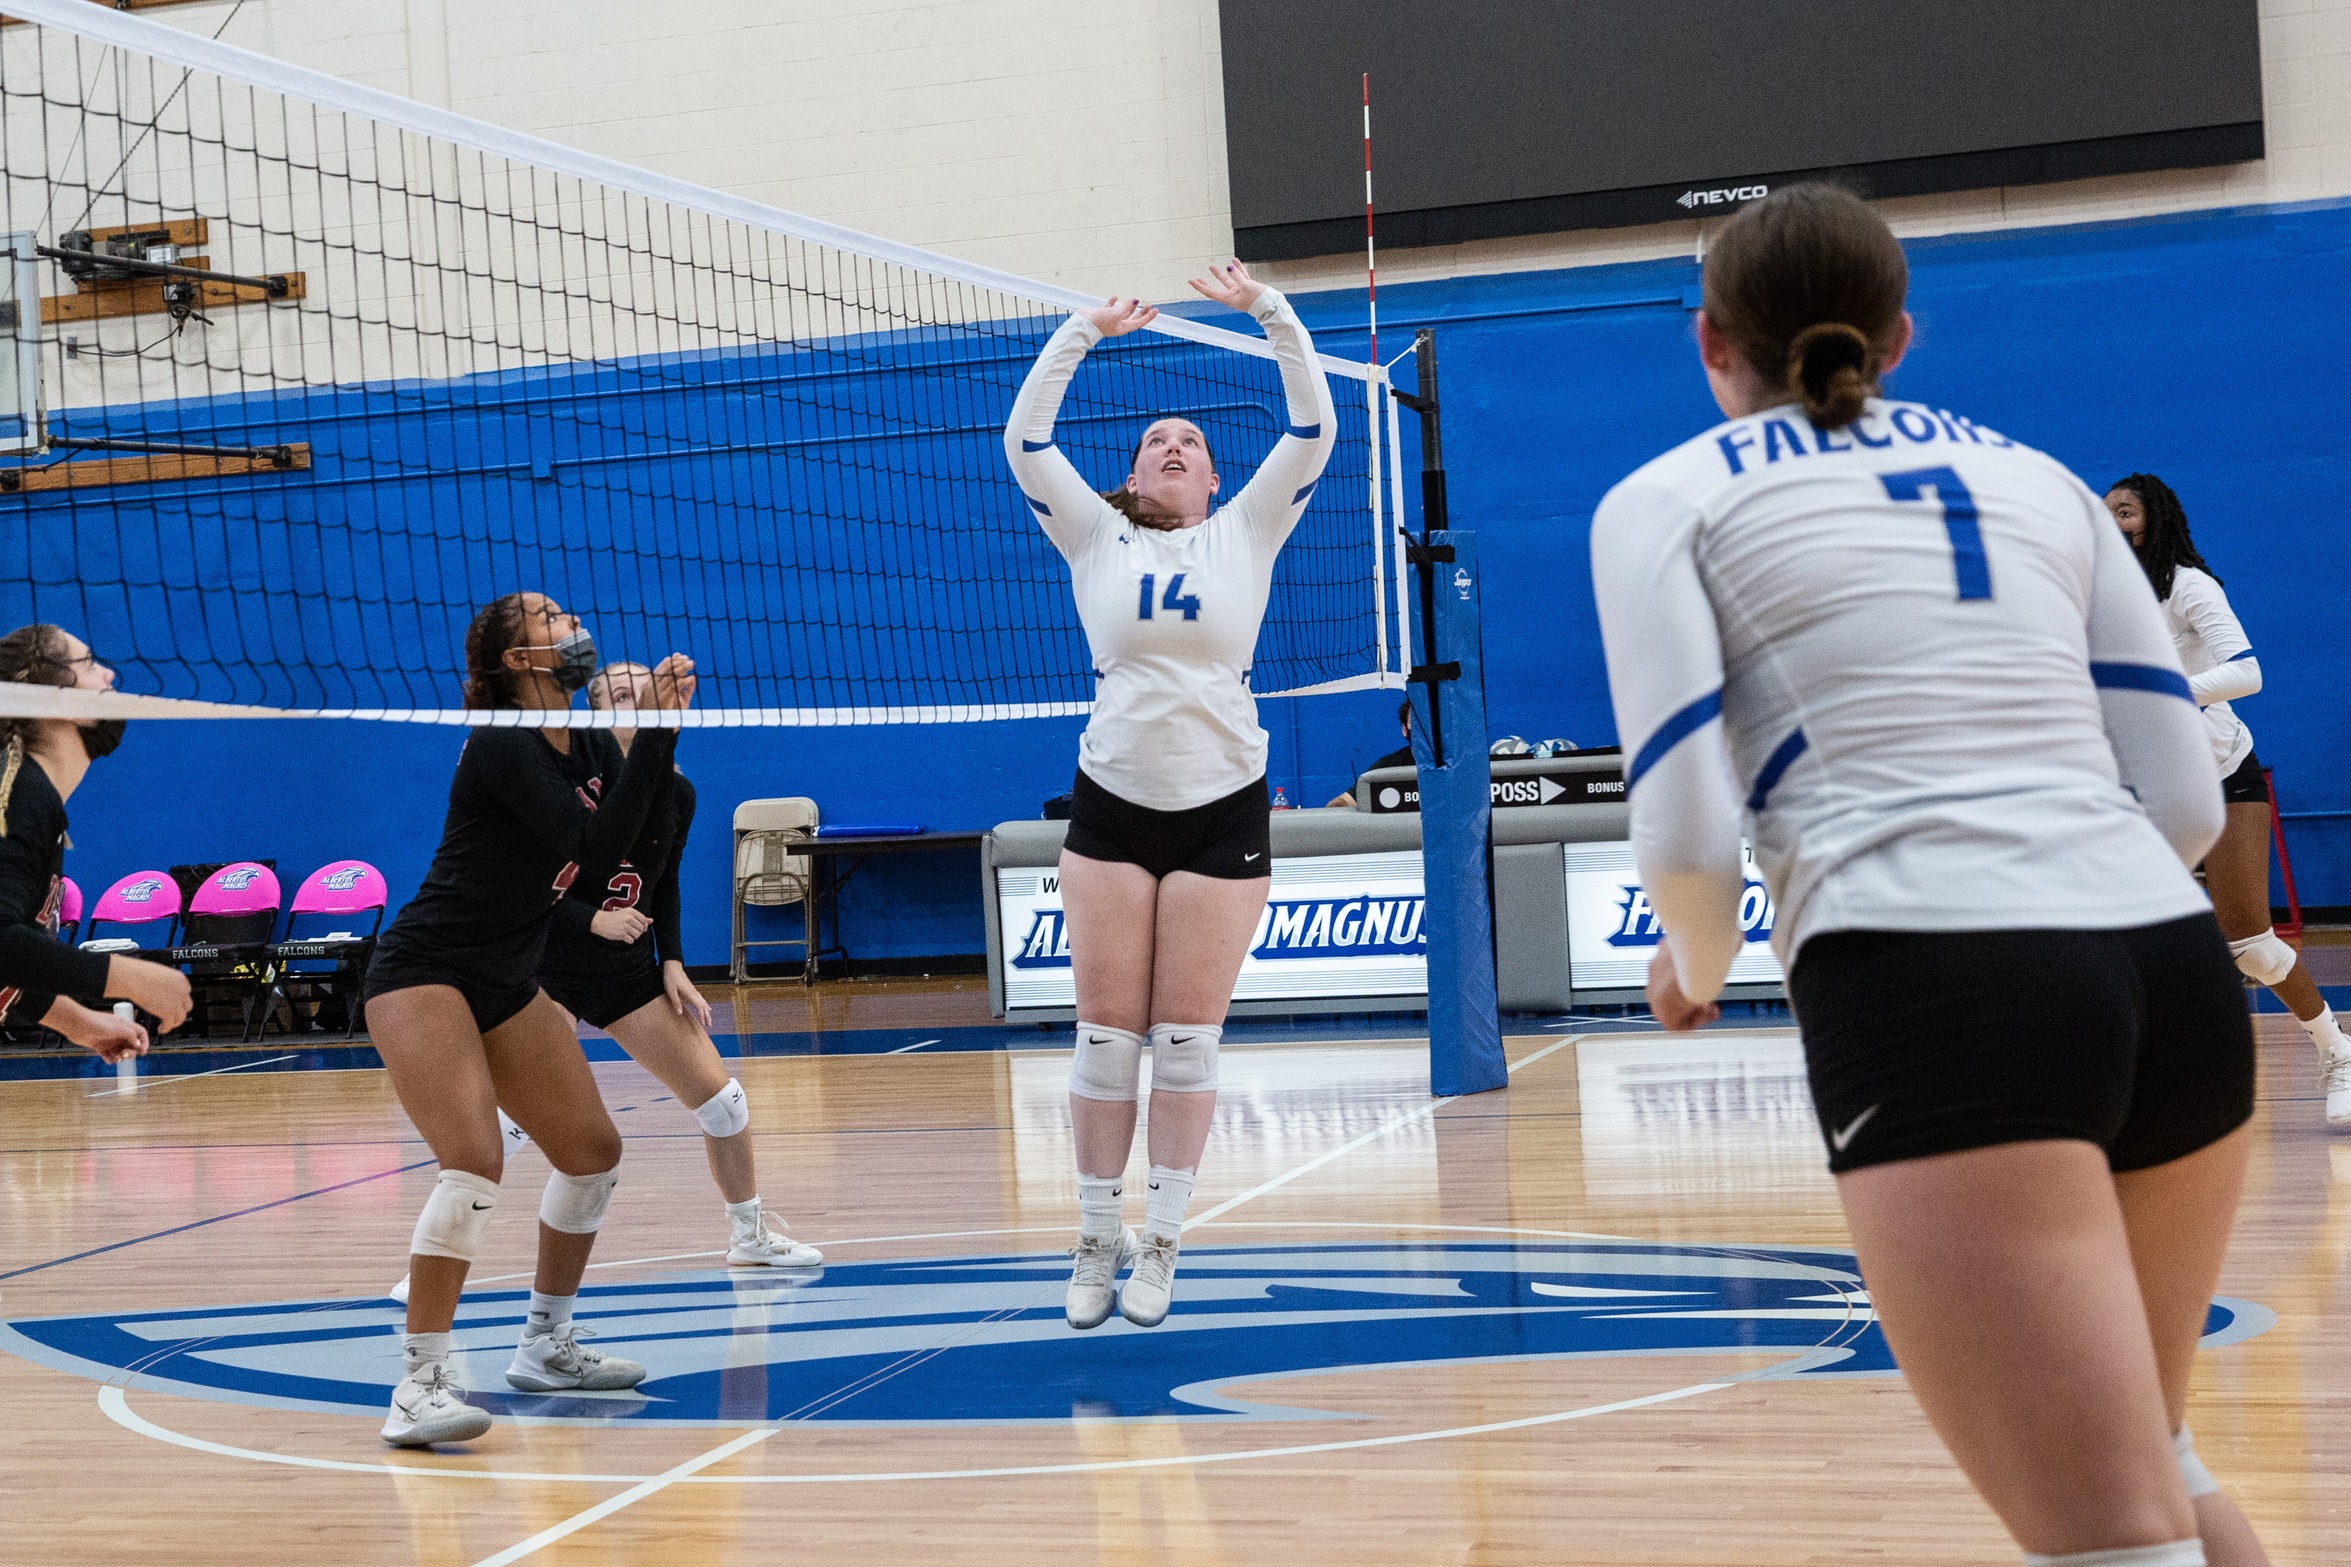 Women's Volleyball Tripped Up by Visiting Blue Jays, 3-1